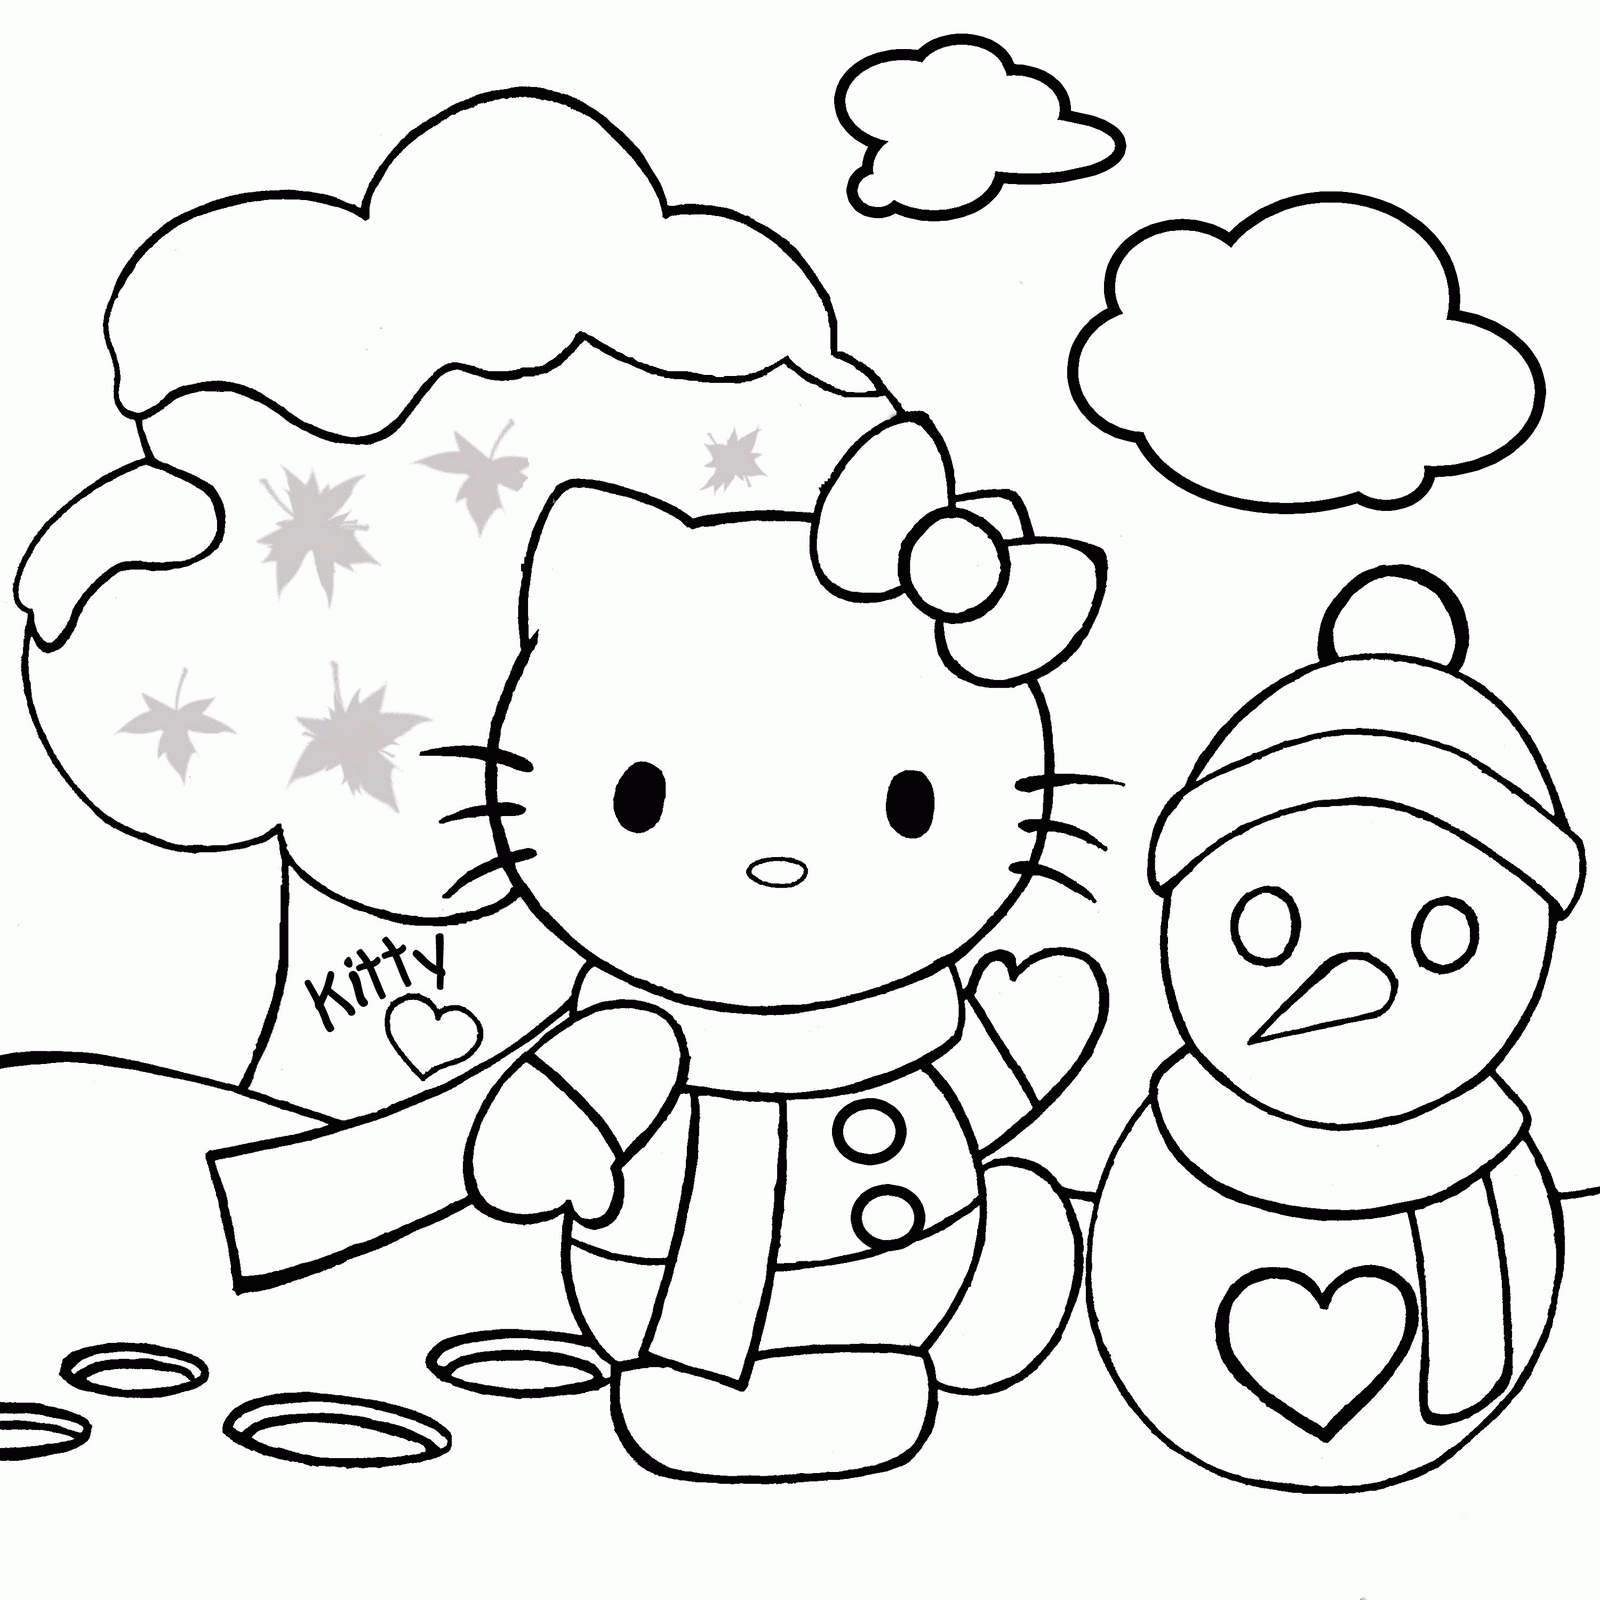 Christmas Coloring Pages For Girls - Coloring Home